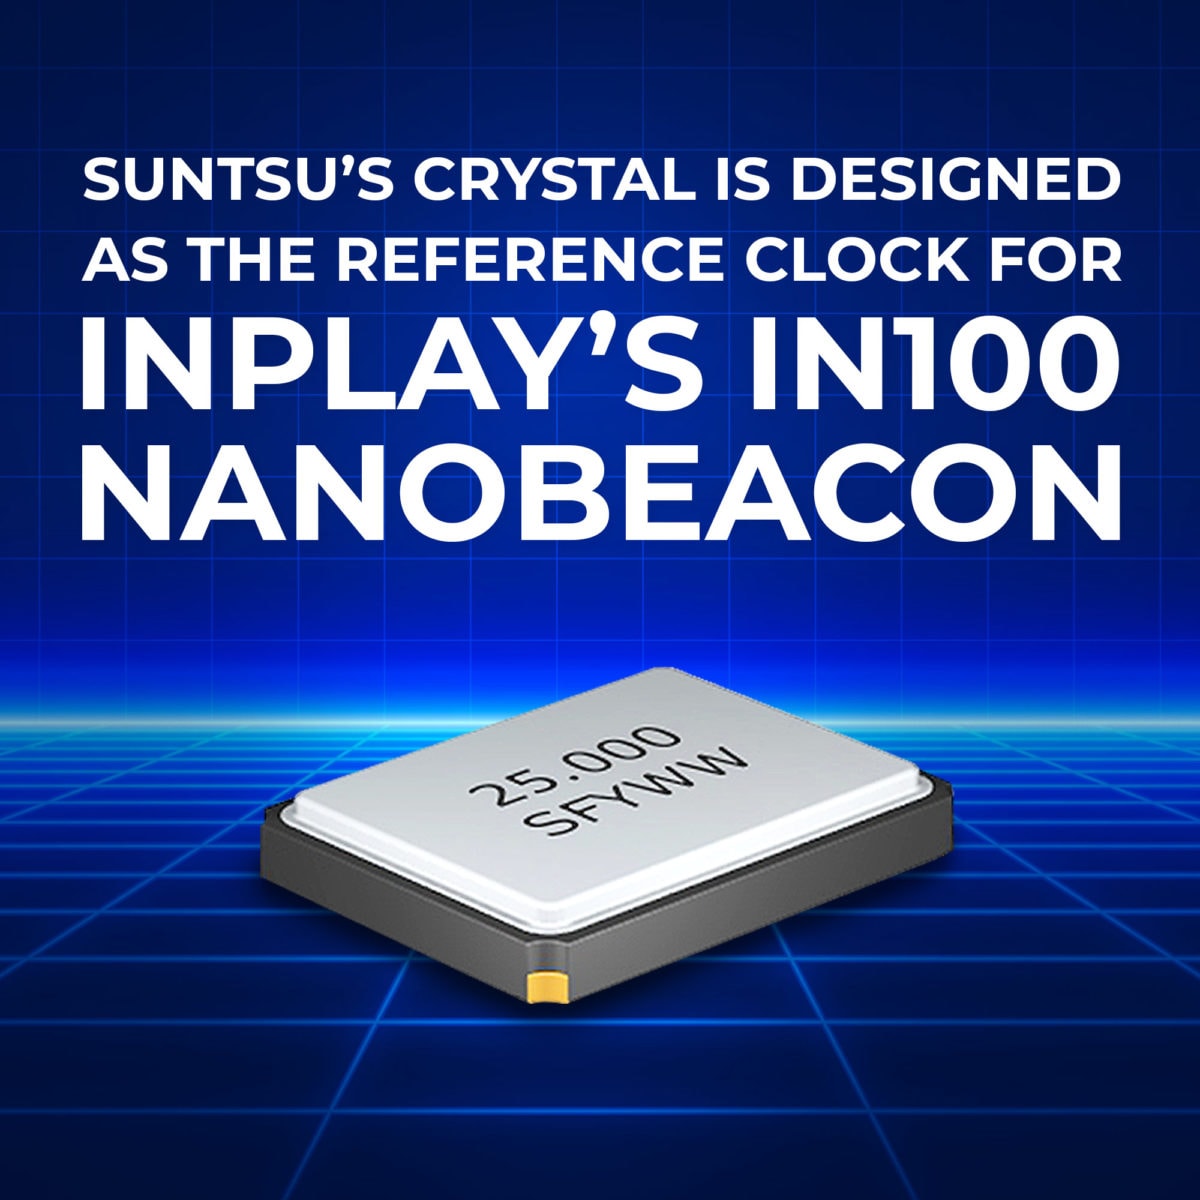 Suntsu’s Crystal Is Designed as the Reference Clock for InPlay’s IN100 NanoBeacon